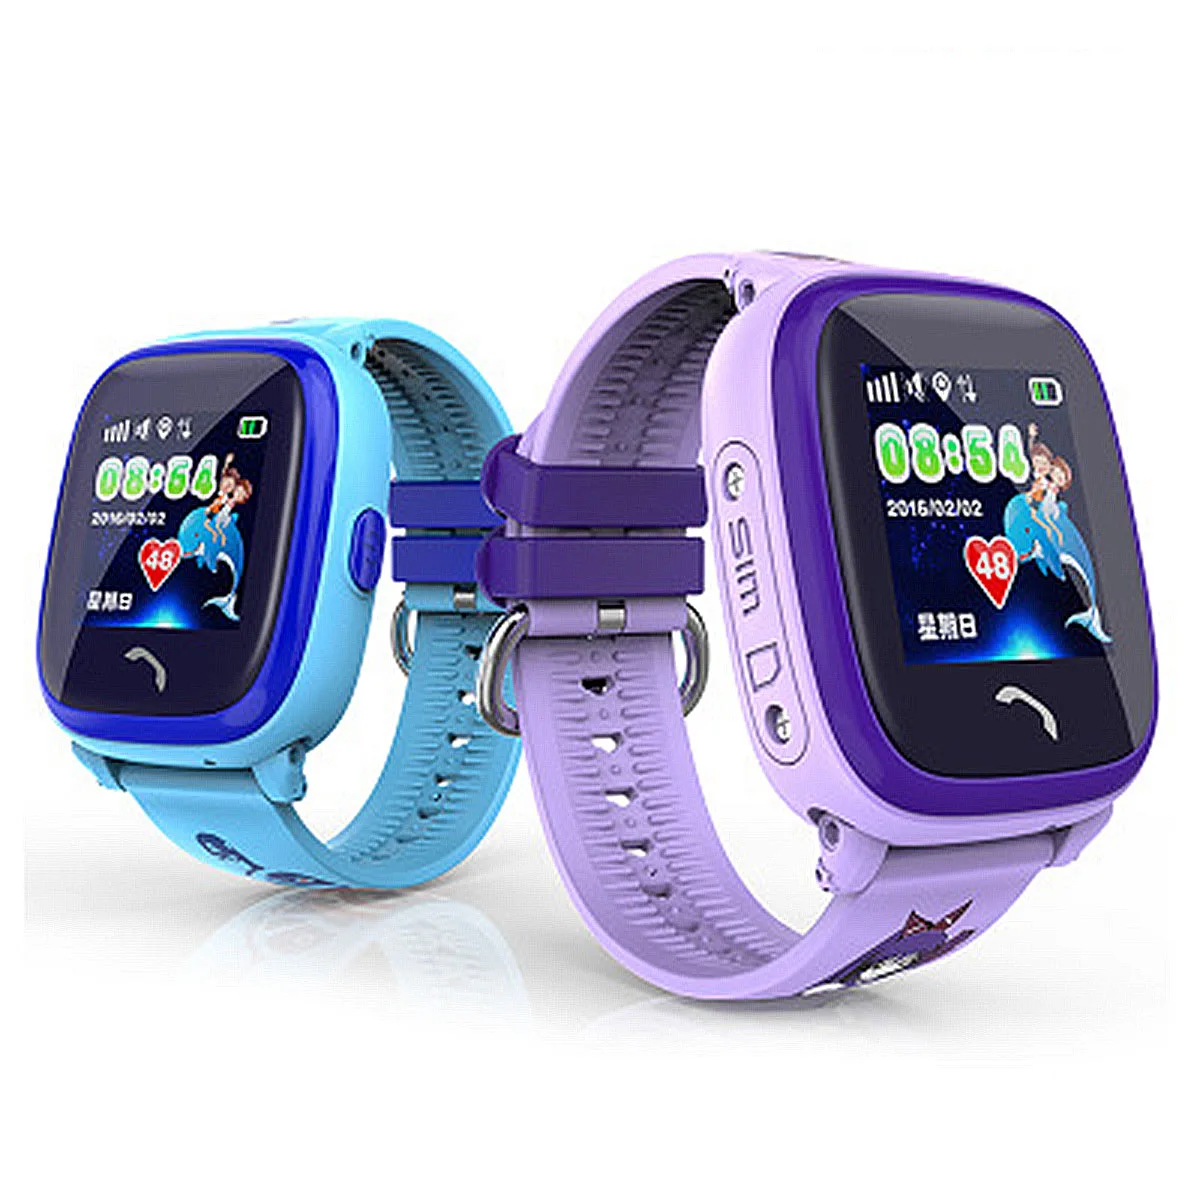 

Waterproof Children's smart watch DF25 Touch screen GPS LBS accurate positioning SOS Device tracking Anti-lost monitor Call